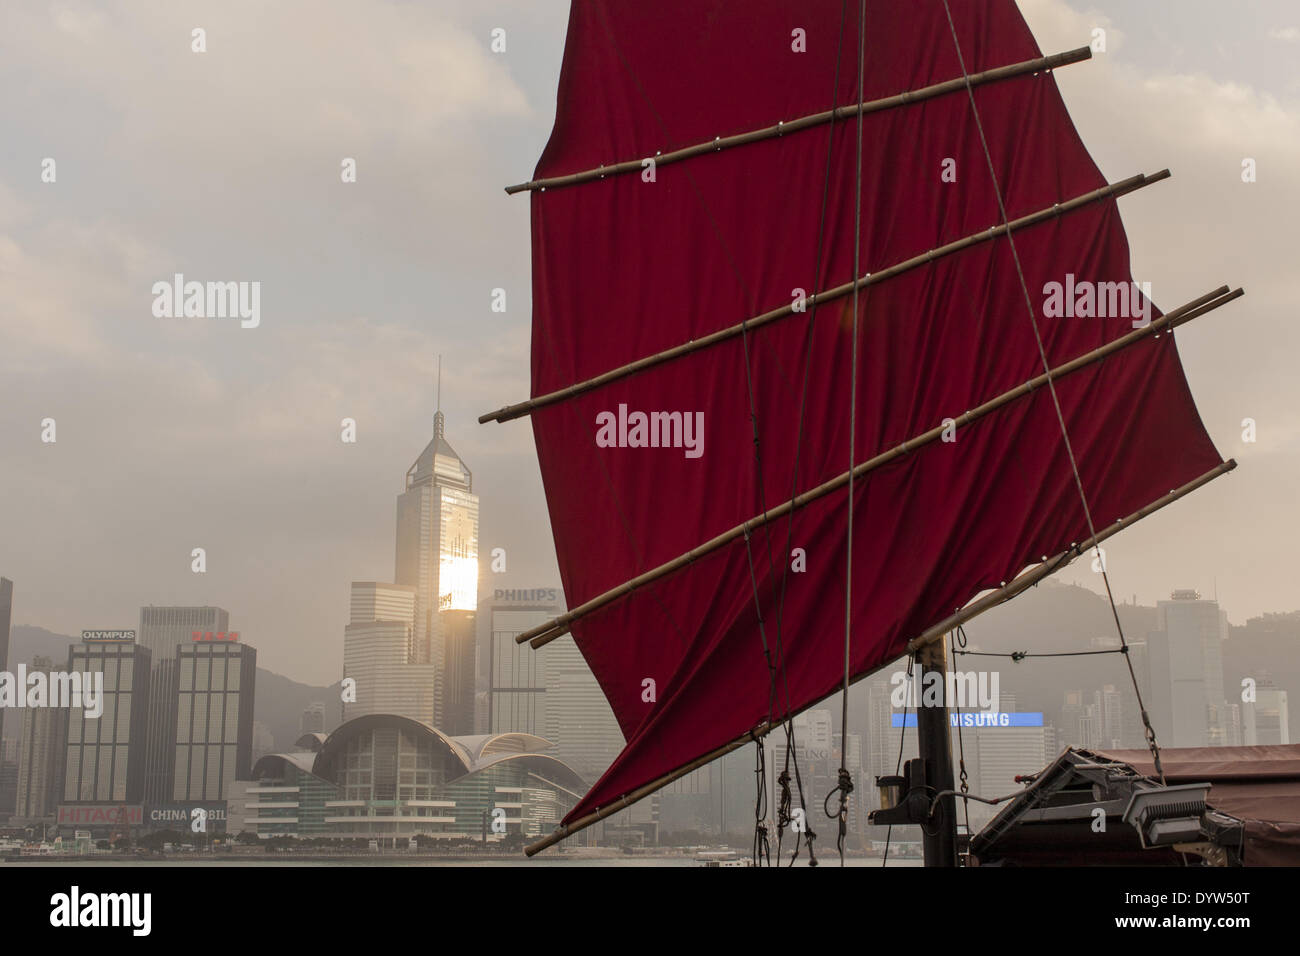 A junk for tourists is berthing at Hong Kong harbour, 2012 Stock Photo